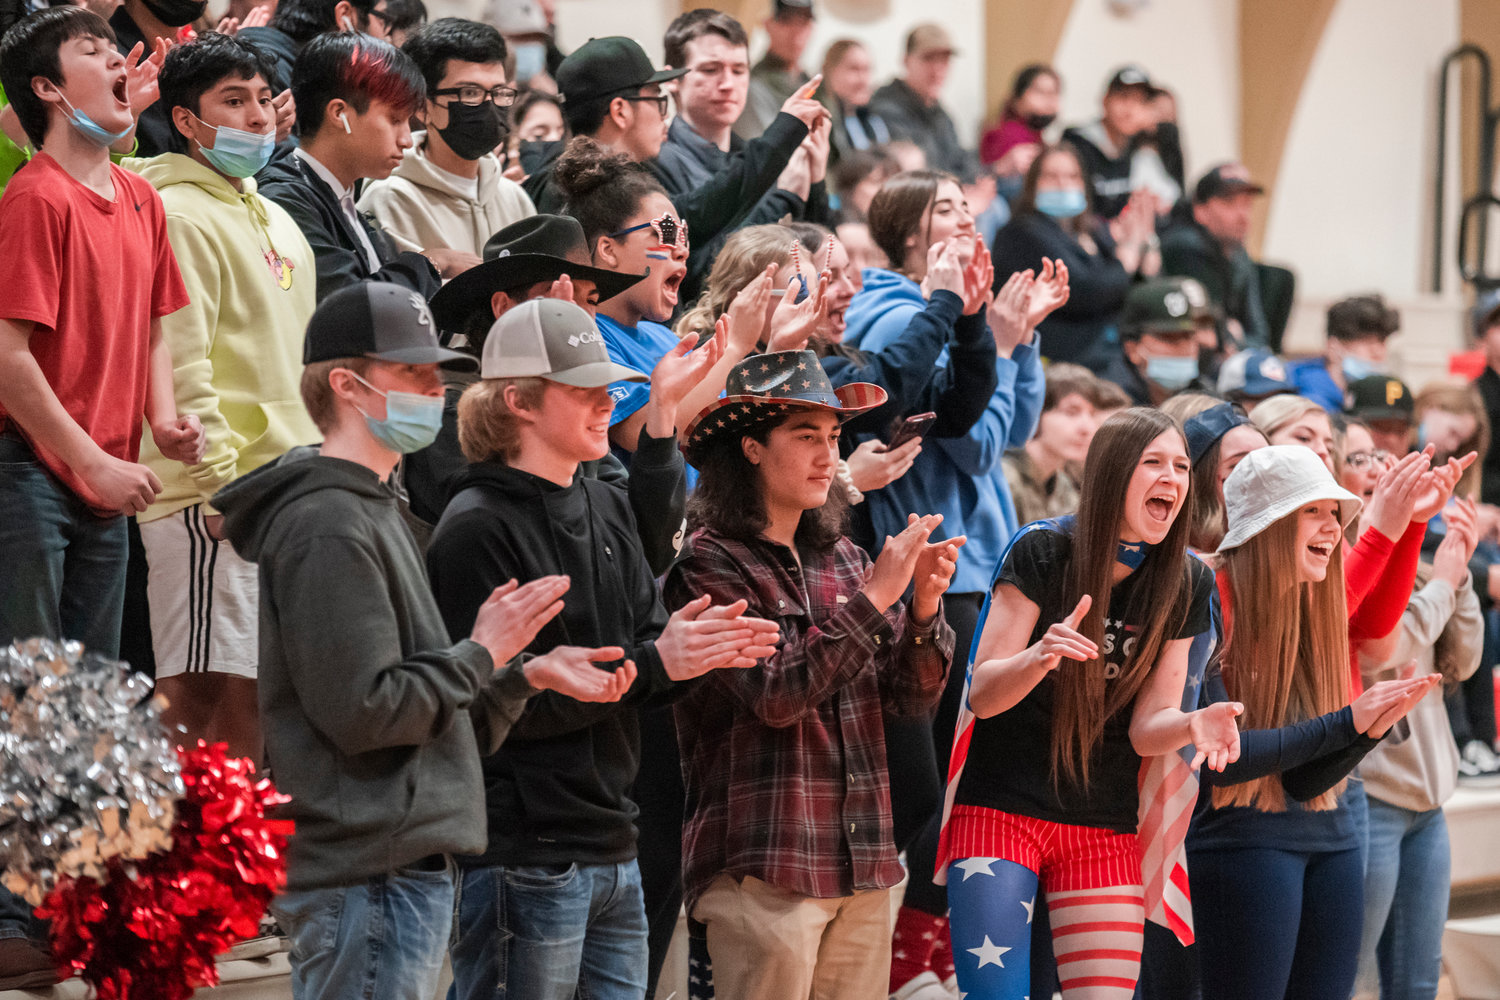 Viking fans cheer during a game Monday night at home.